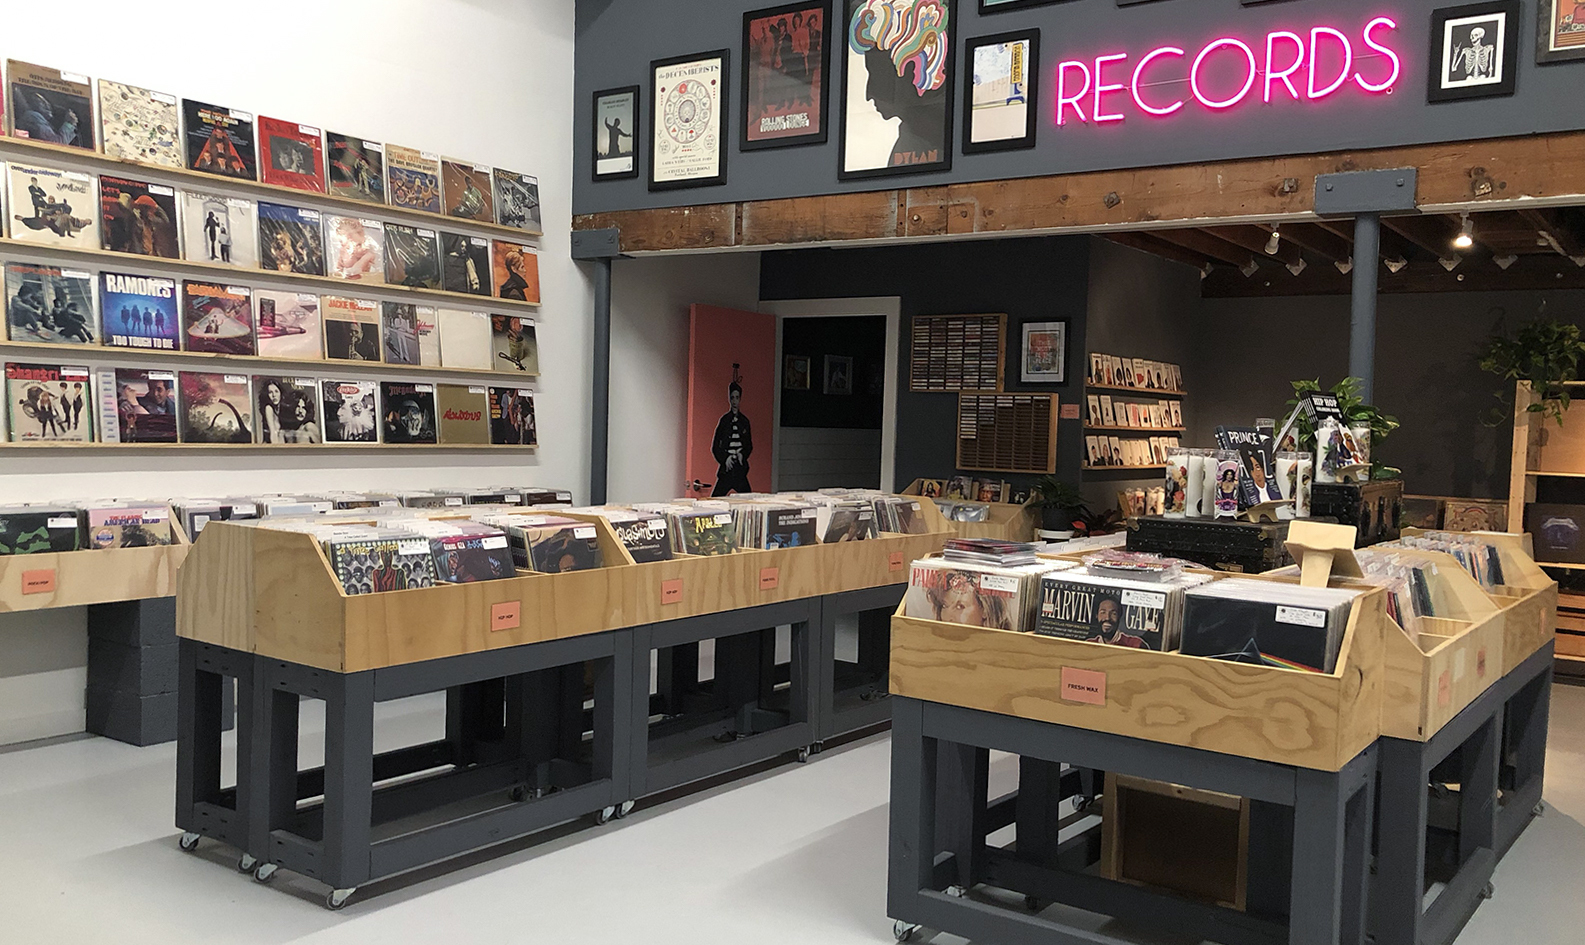 West Palm Beach's local record shop Rust & Wax interior with aisles of record bins. The wall above features a collection of vintage music posters and a bright pink neon sign of the word "records"